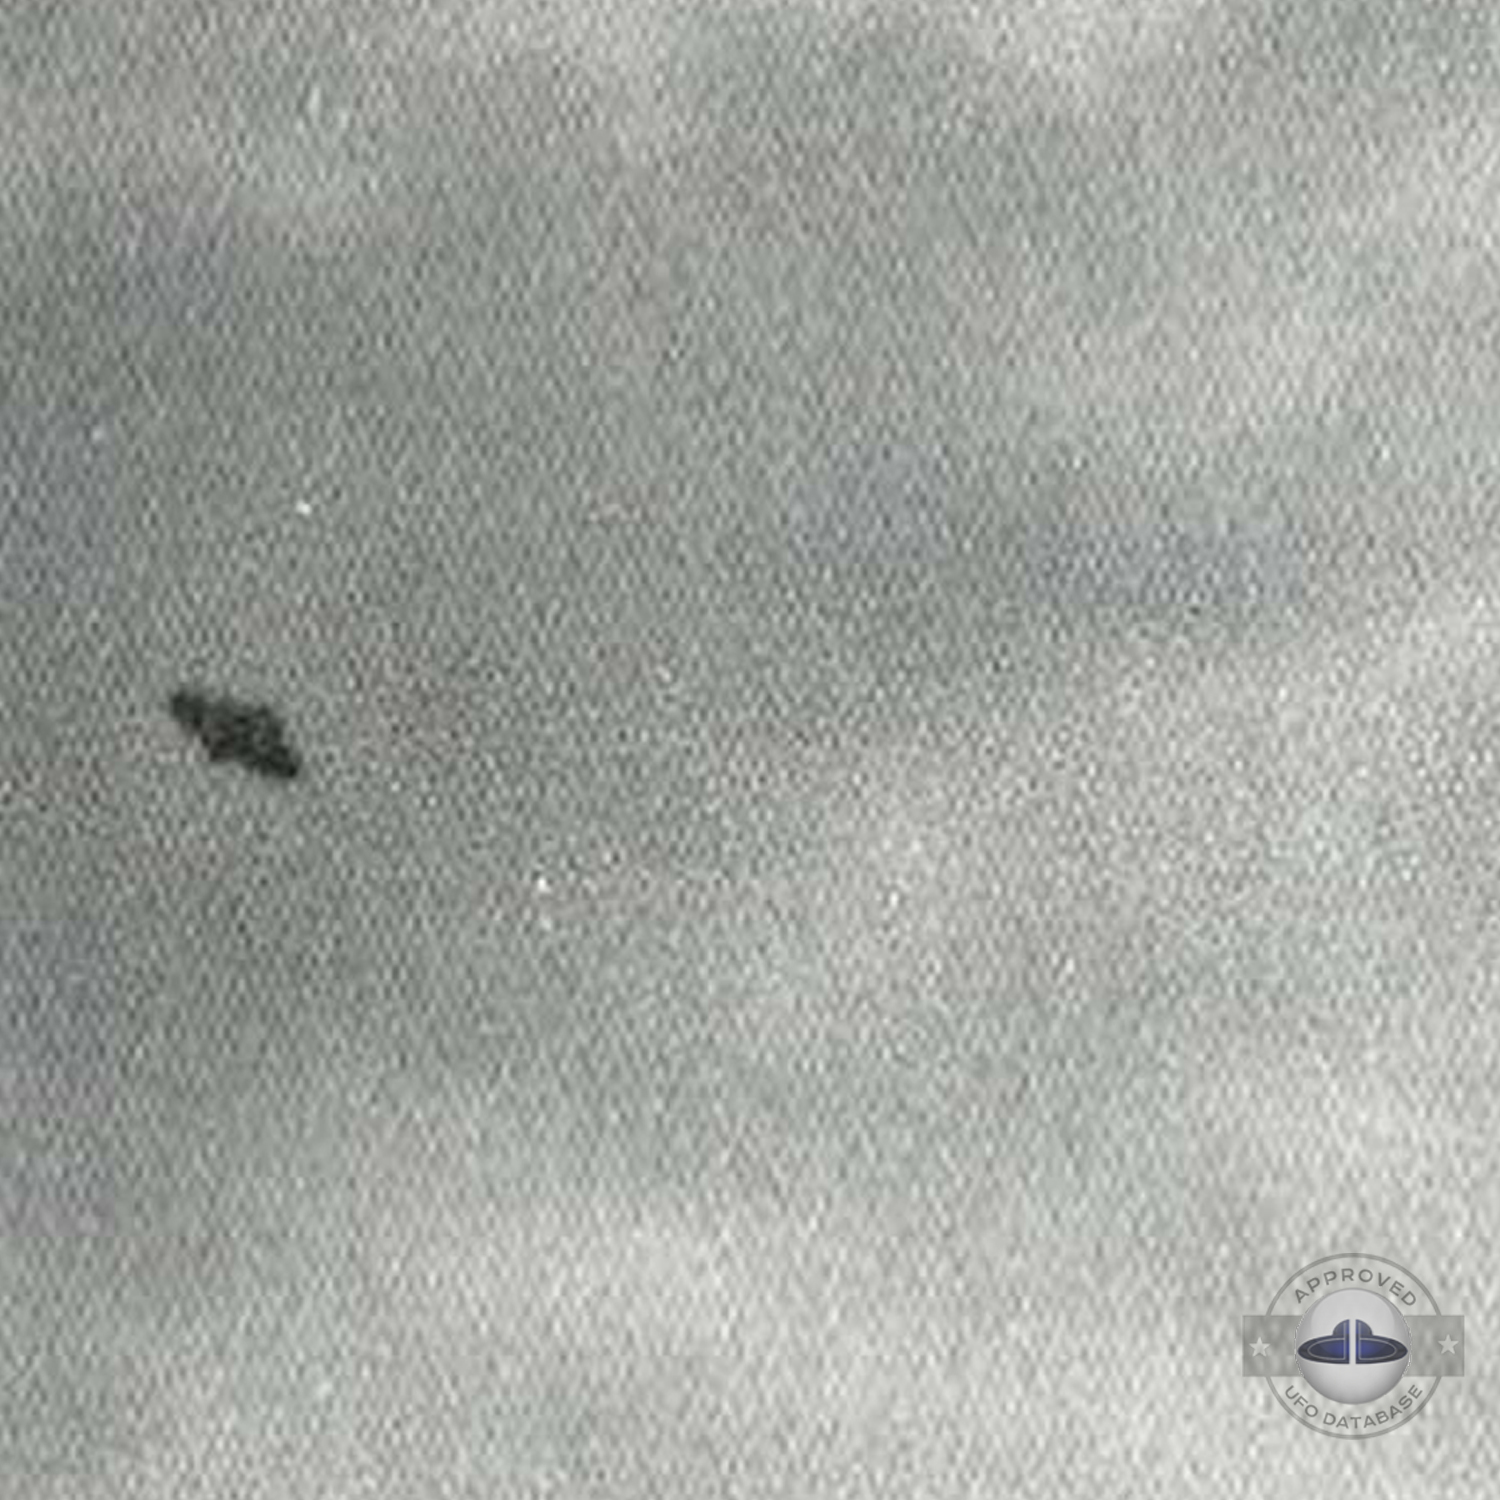 UFO over Sapporo, Hokkaido - we can see a statue of the virgin Mary UFO Picture #69-3